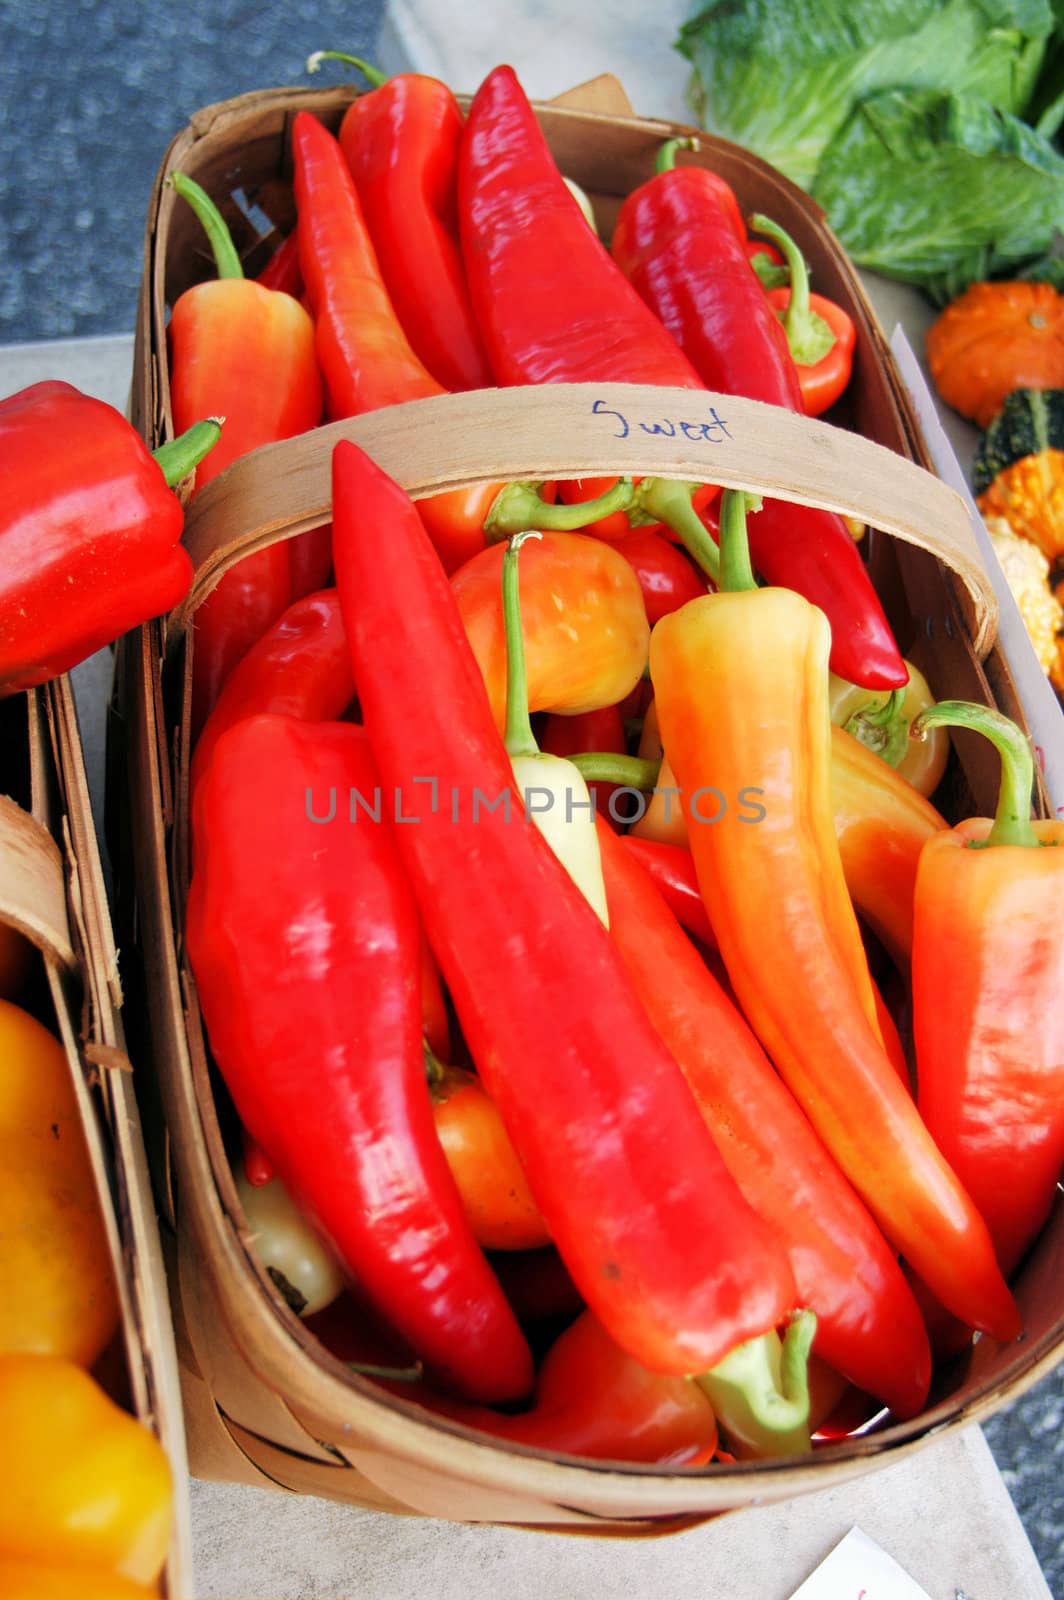 Red peppers at the farmers market by northwoodsphoto